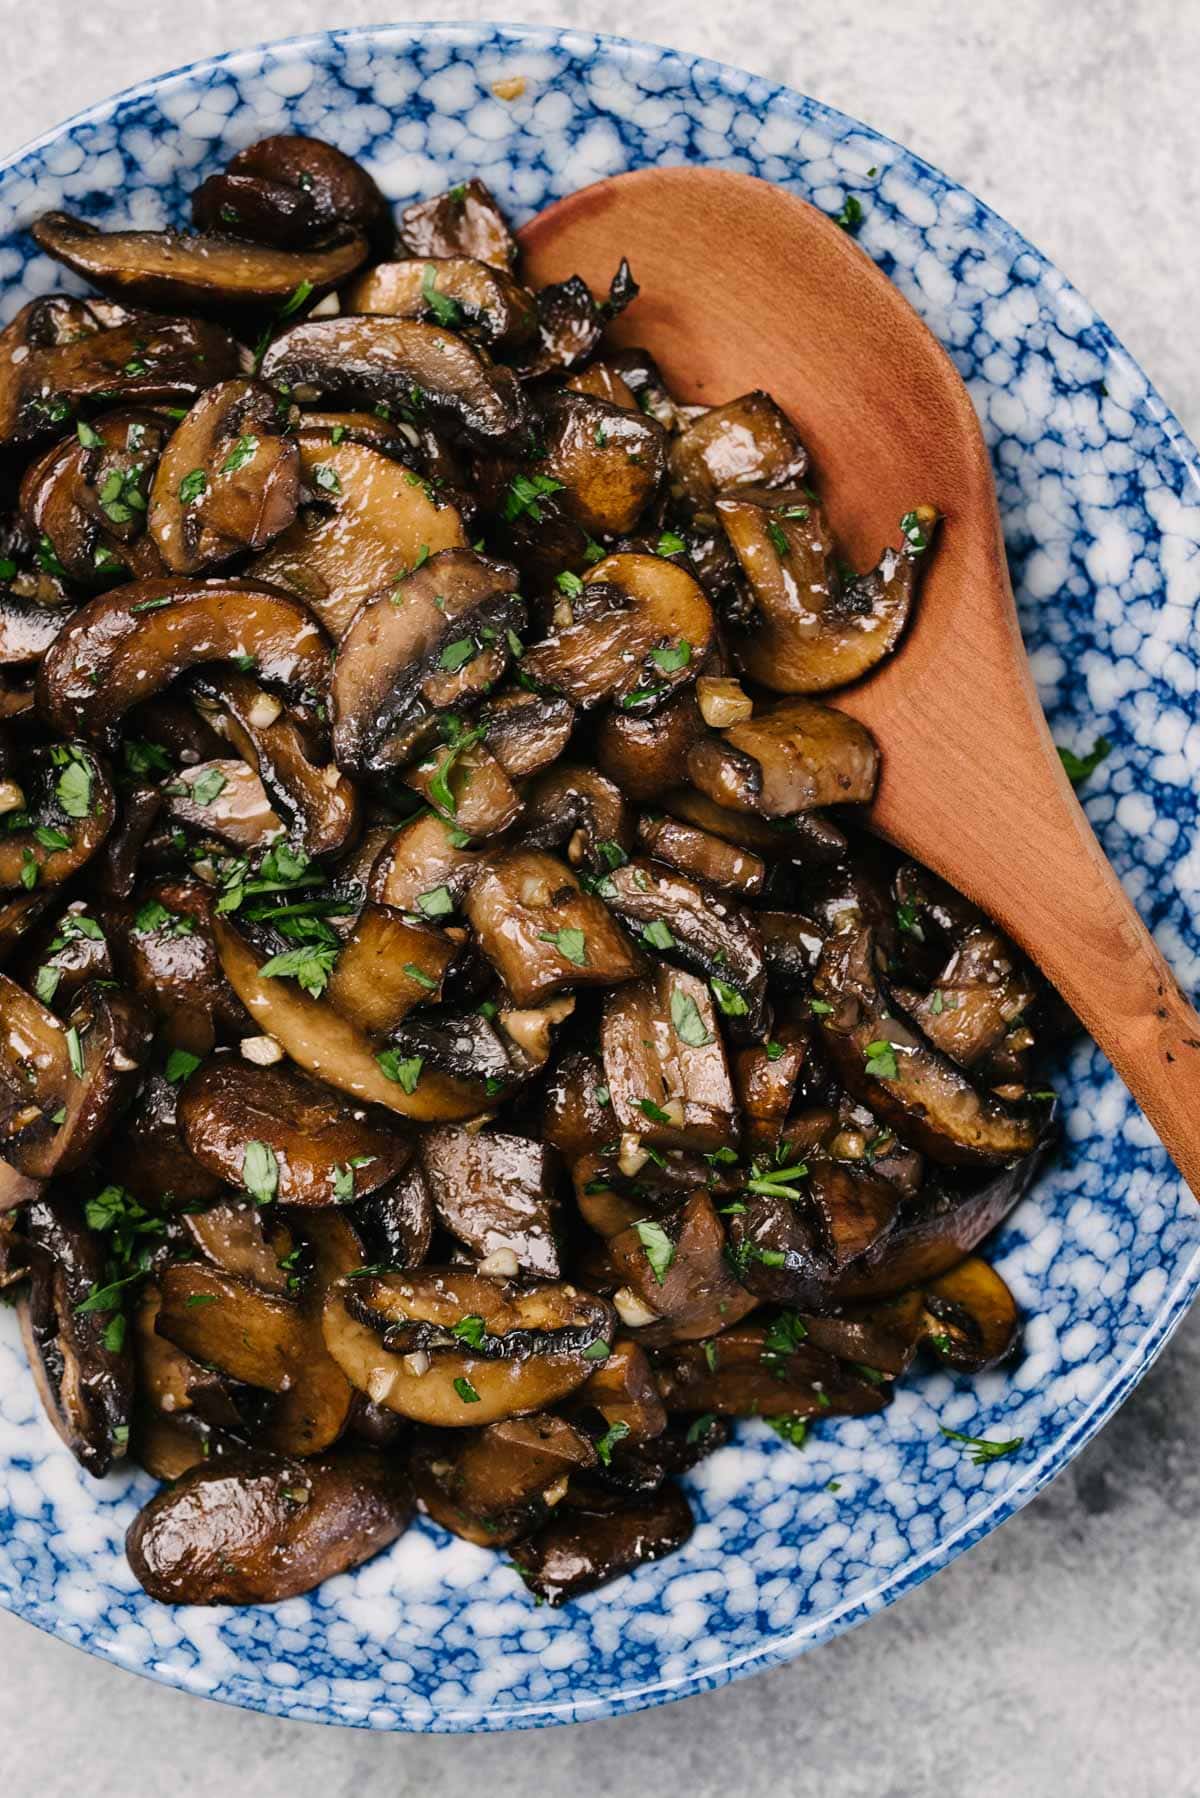 A wood spoon tucked into sauteed mushrooms in a blue speckled serving bowl on a cement background.